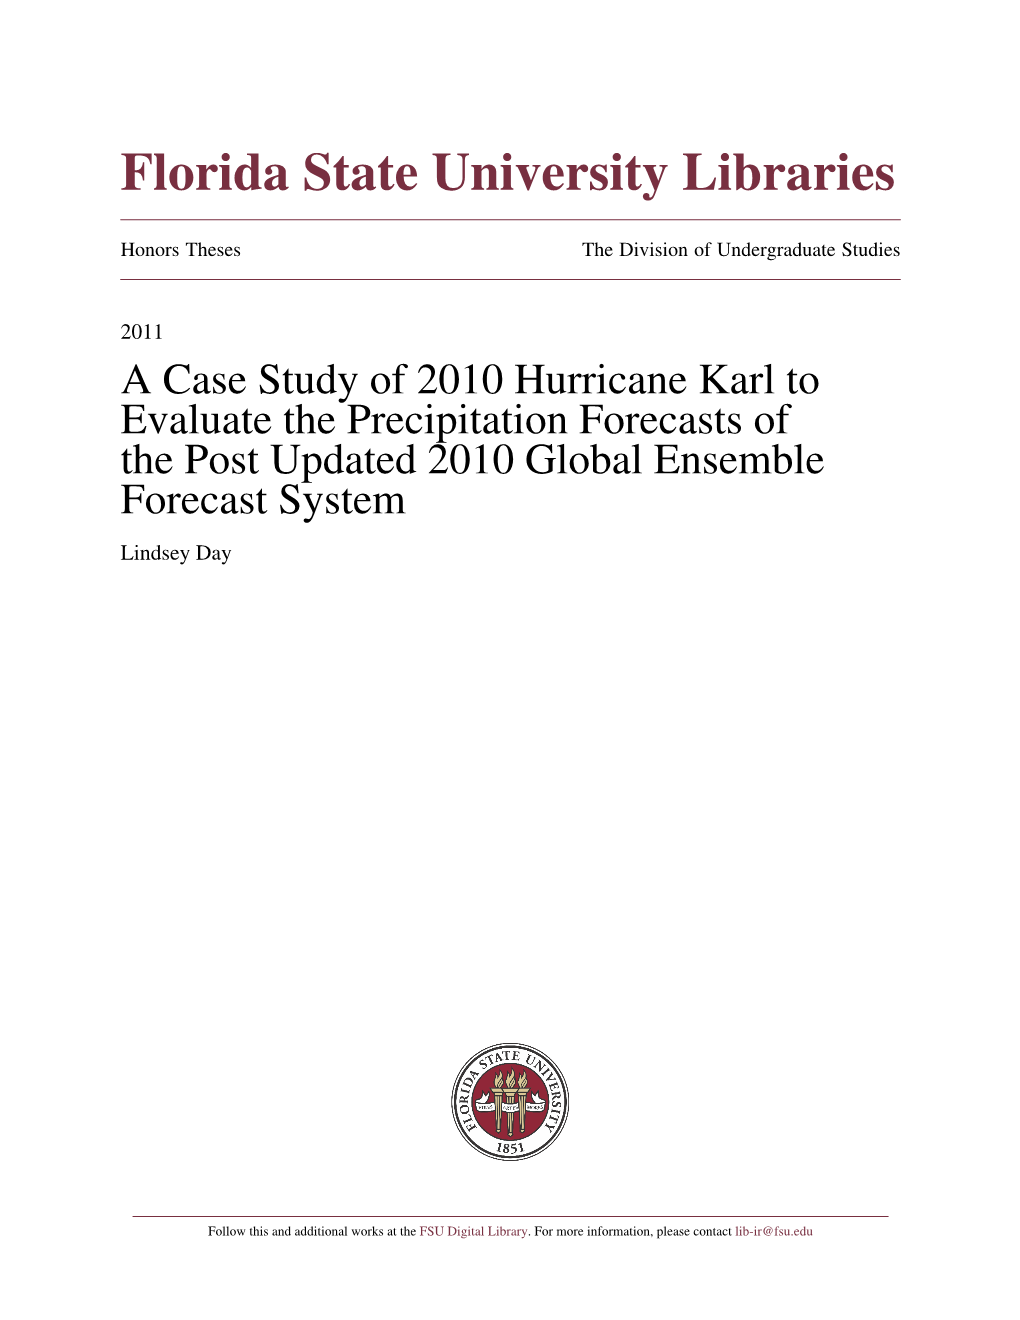 A Case Study of 2010 Hurricane Karl to Evaluate the Precipitation Forecasts of the Post Updated 2010 Global Ensemble Forecast System Lindsey Day